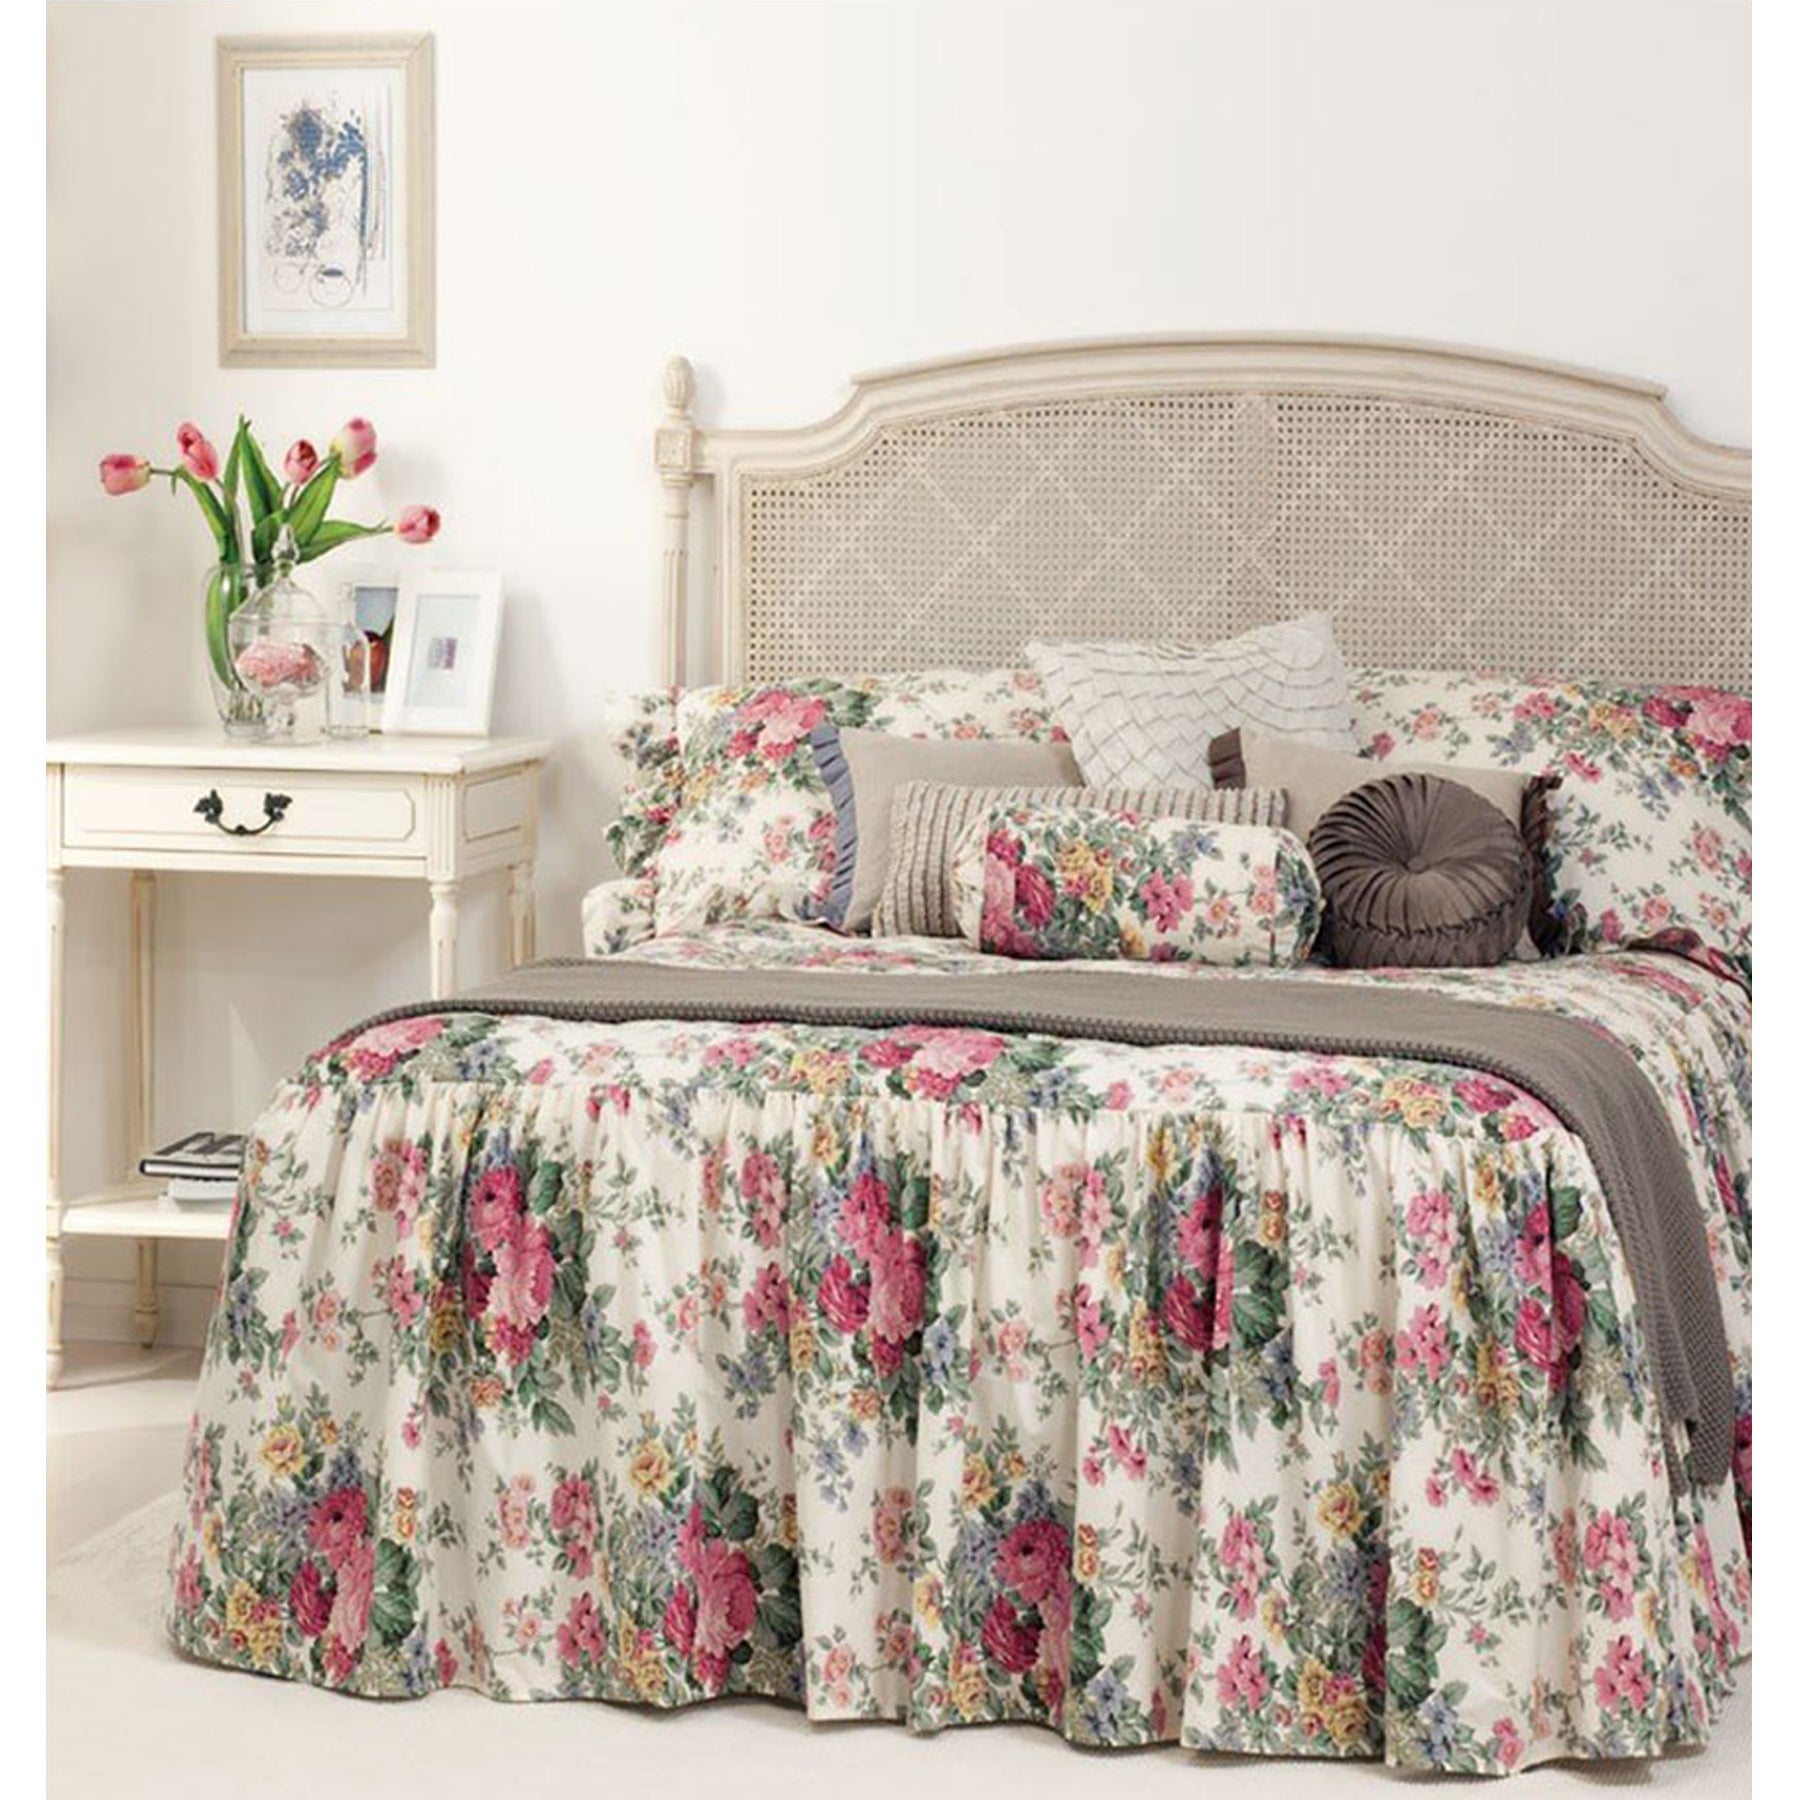 ROSEWOOD Bedspread and Accessories by Gainsborough